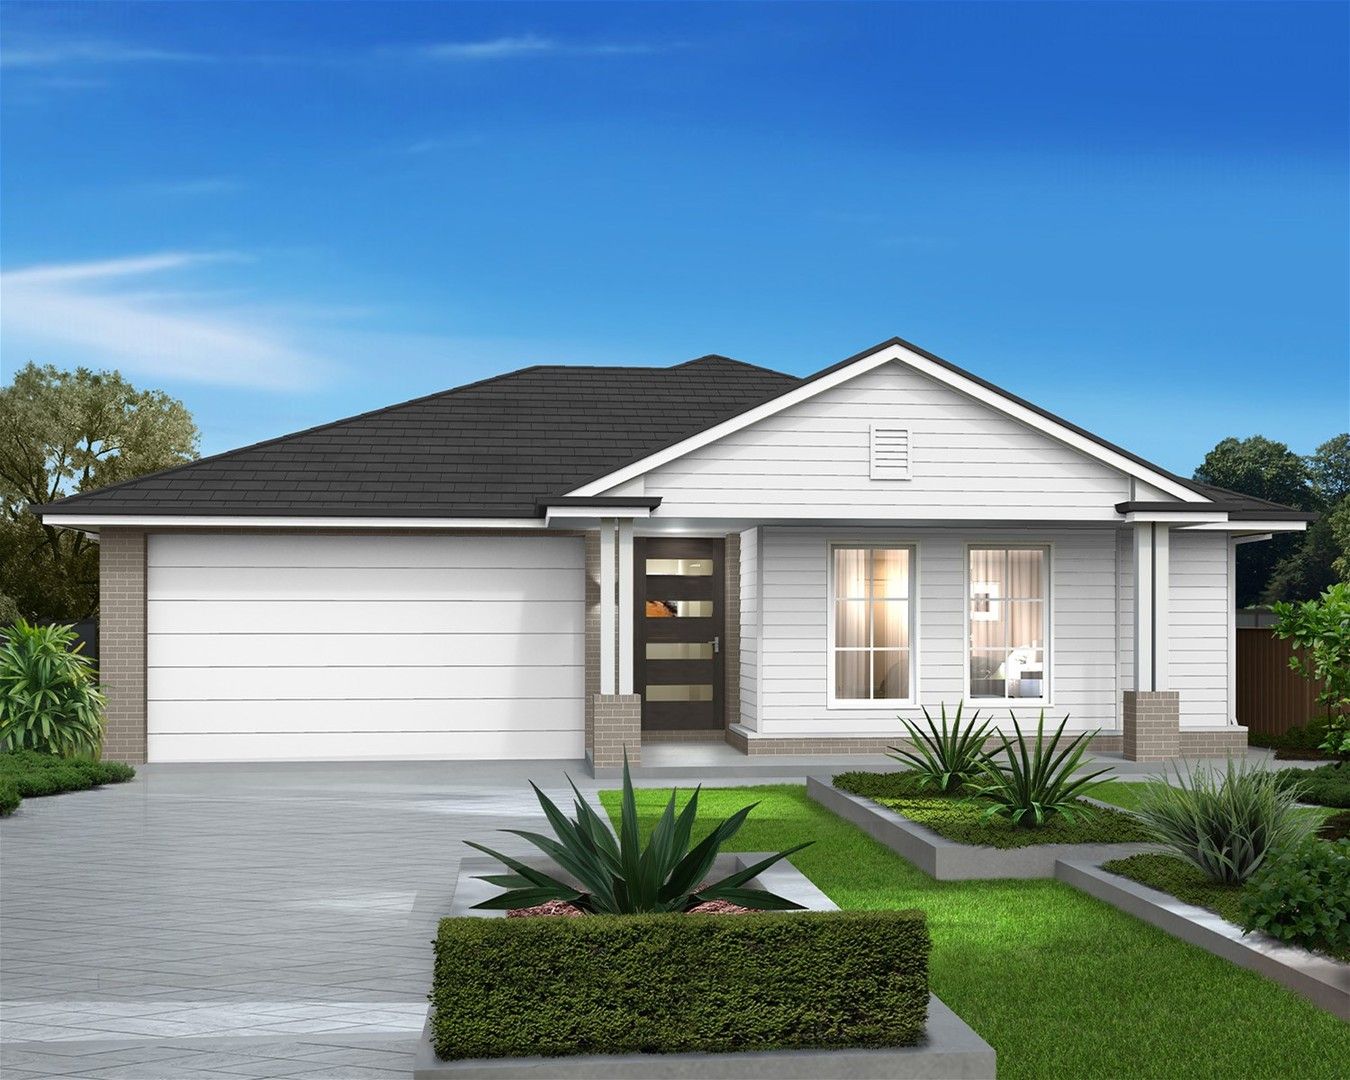 4 bedrooms New House & Land in Lot 47 Rinanna Place ST GEORGES BASIN NSW, 2540